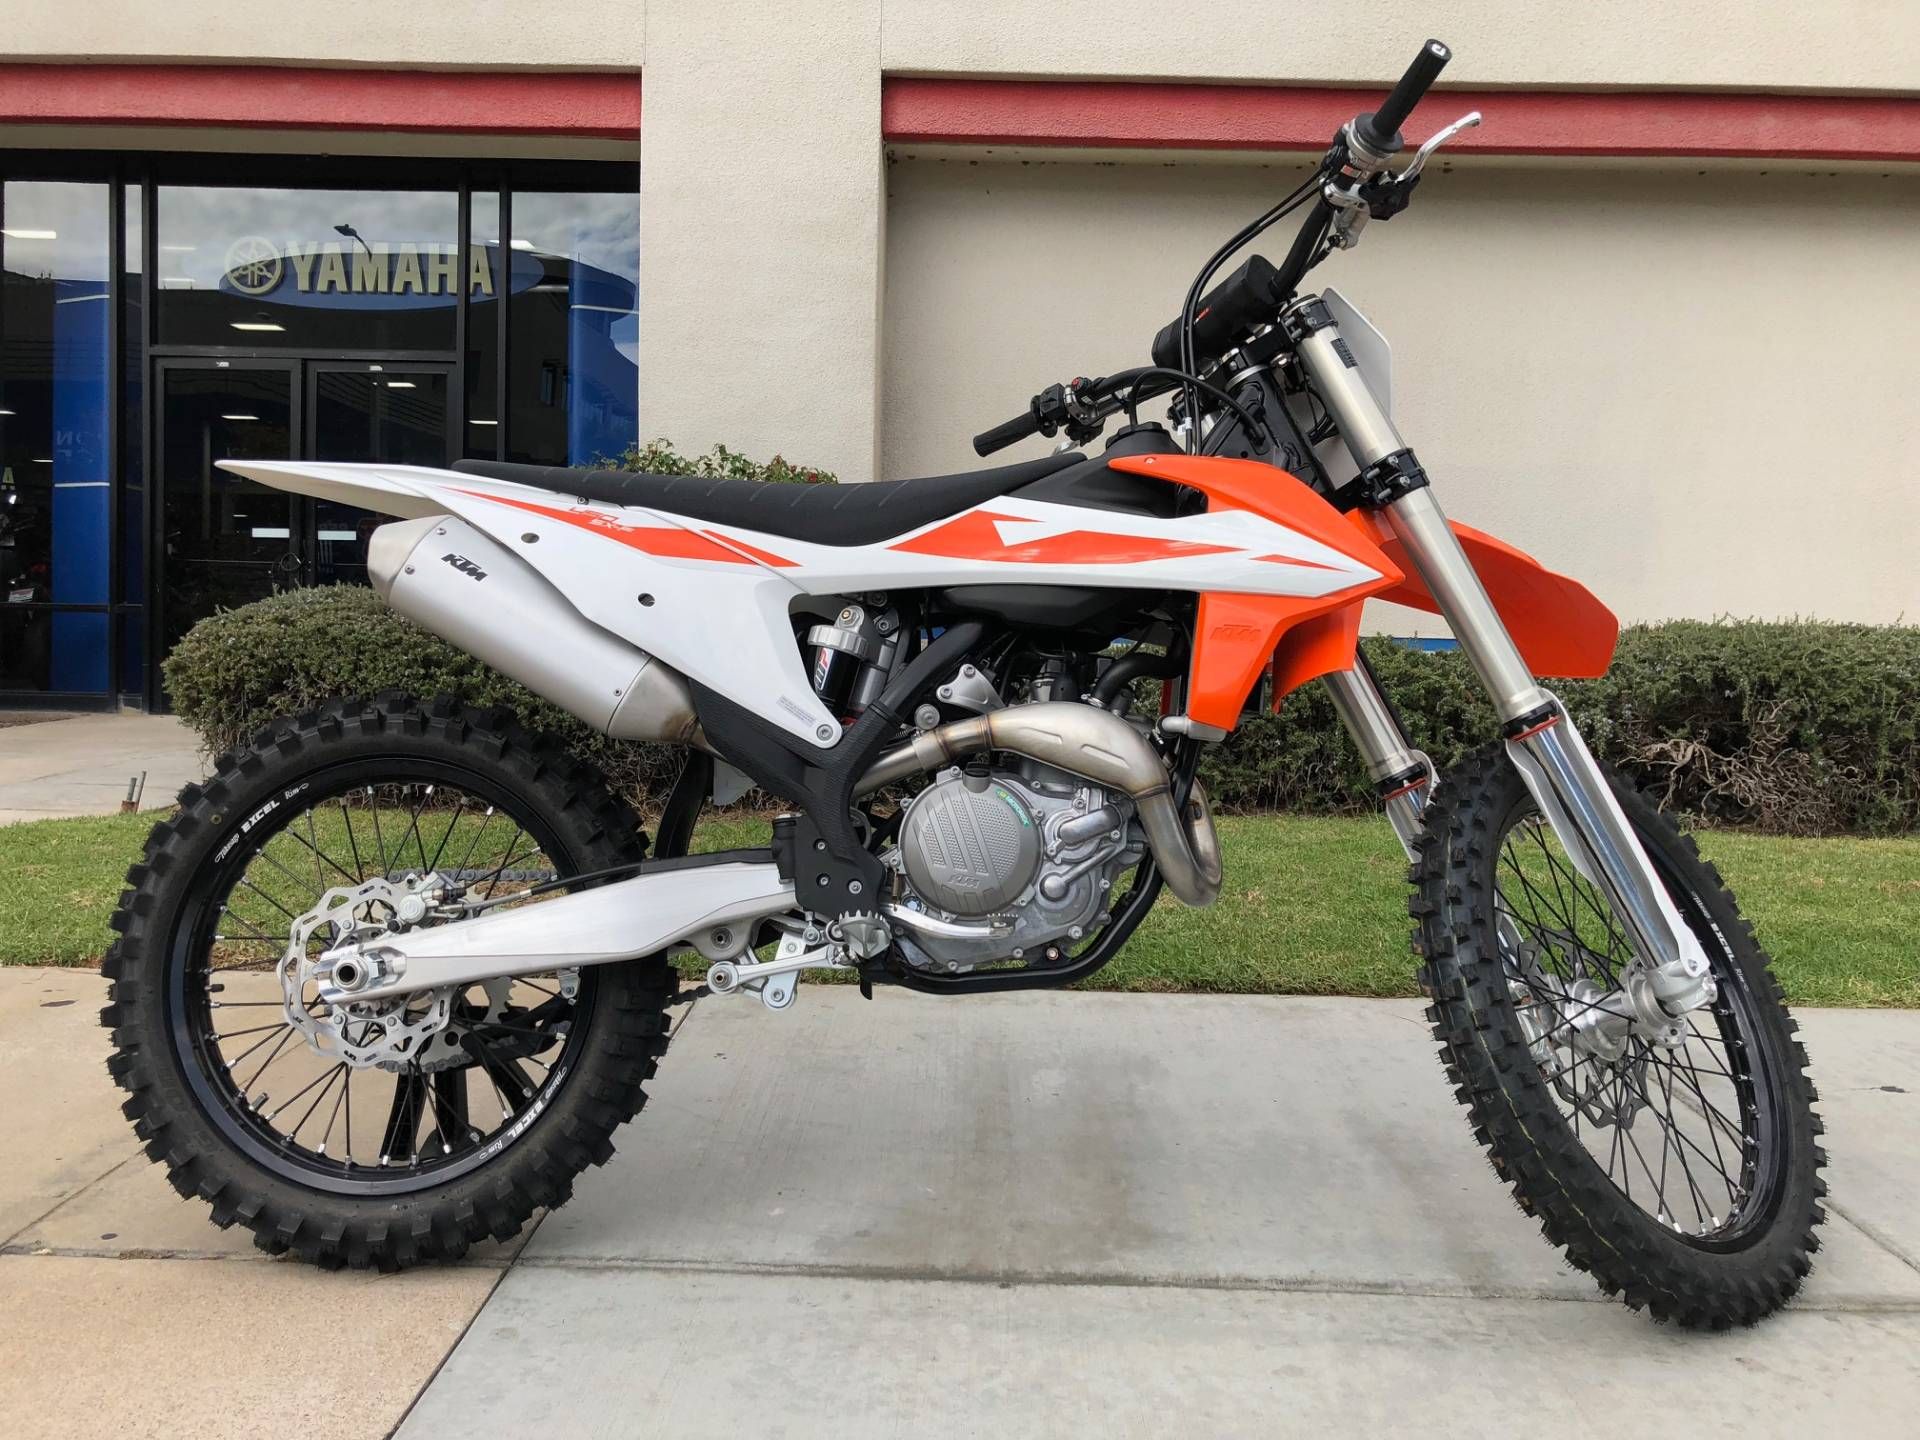 KTM 450 SXF in front of store